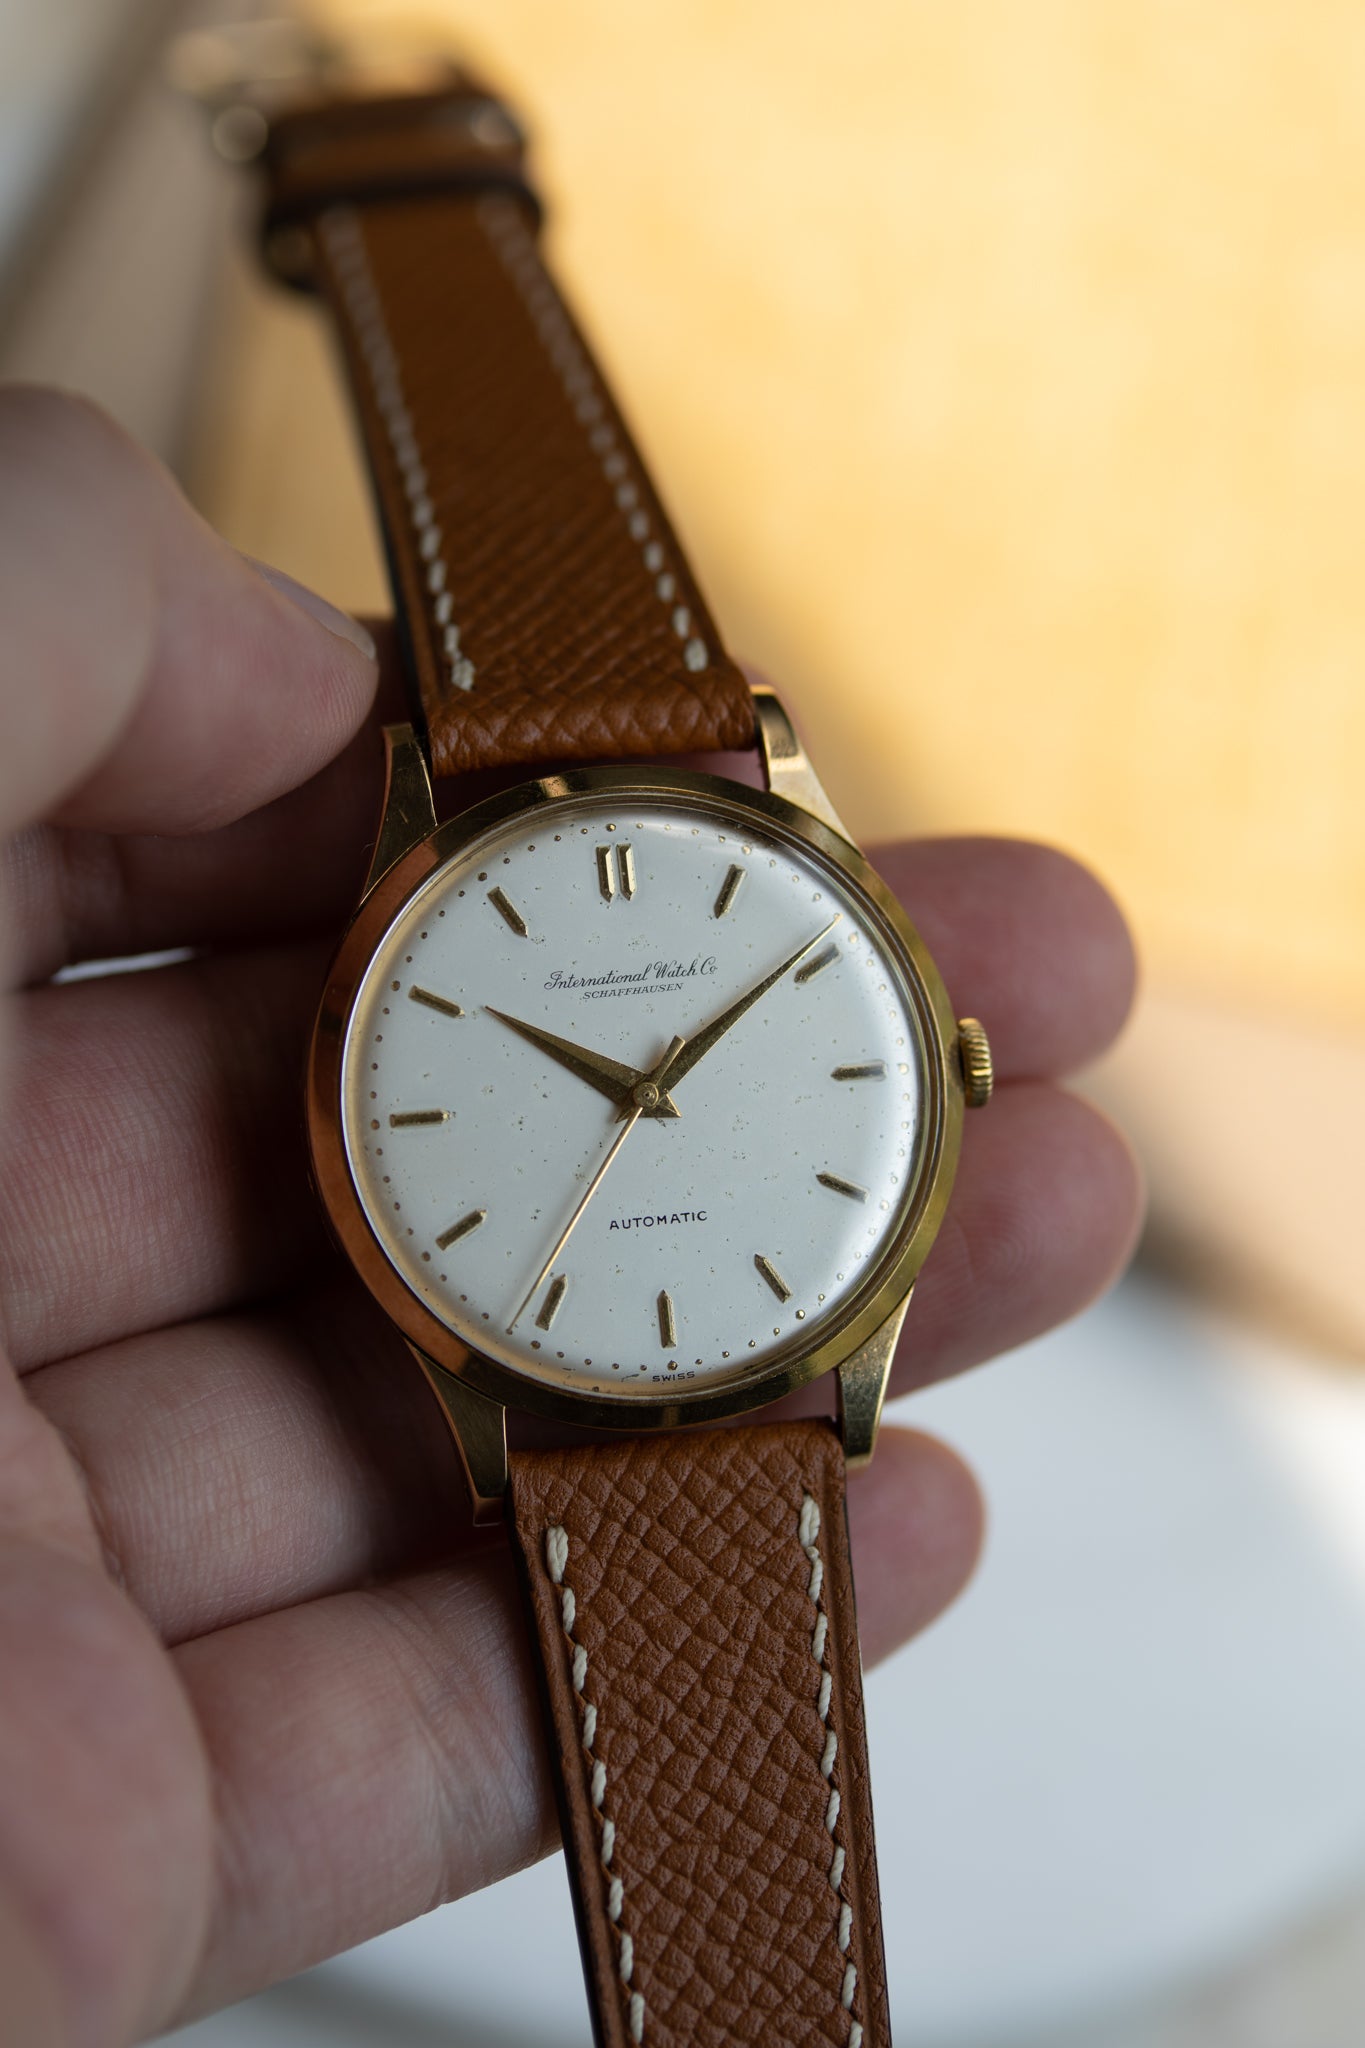 IWC dress watch in 18k Gold, cal. 853 from 1962/3